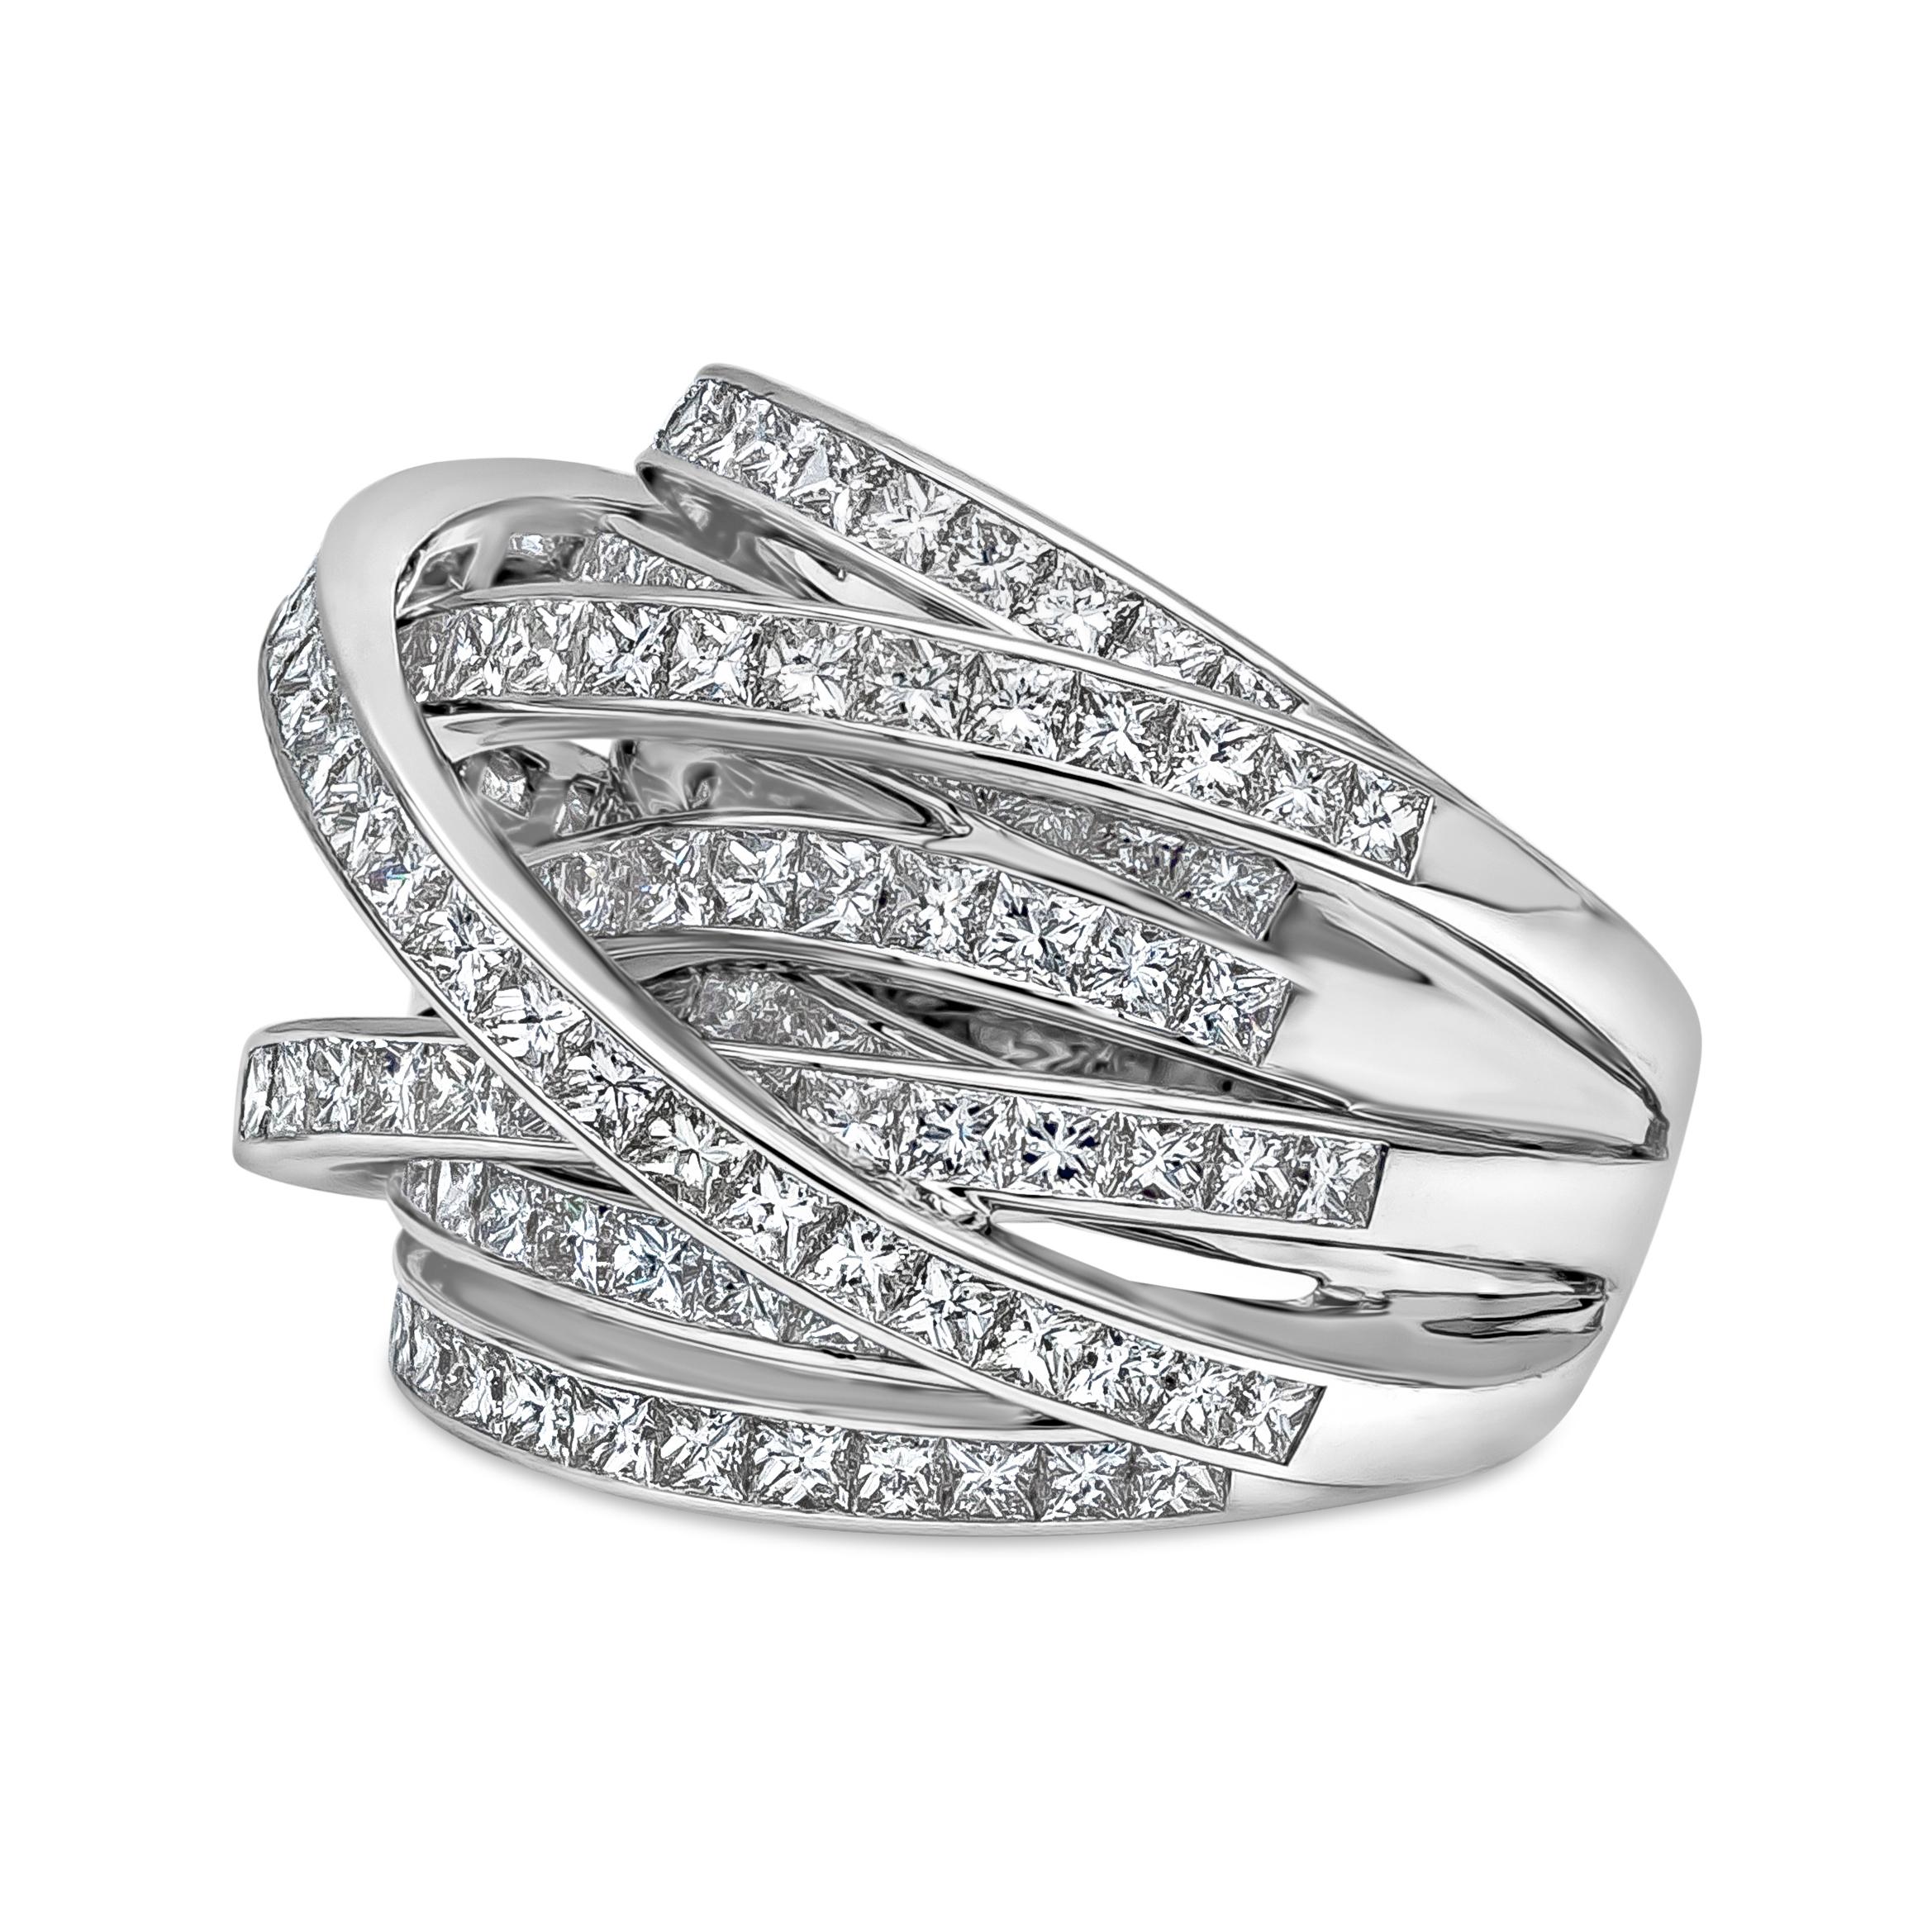 A beautiful ring style showcasing 9 rows of princess cut diamonds in channel set that elegantly intertwine with each other. Diamonds weigh 5.10 carats total in E-F Color and VS in Clarity. Made with 18K White Gold. Size 6.5 US and resizable upon